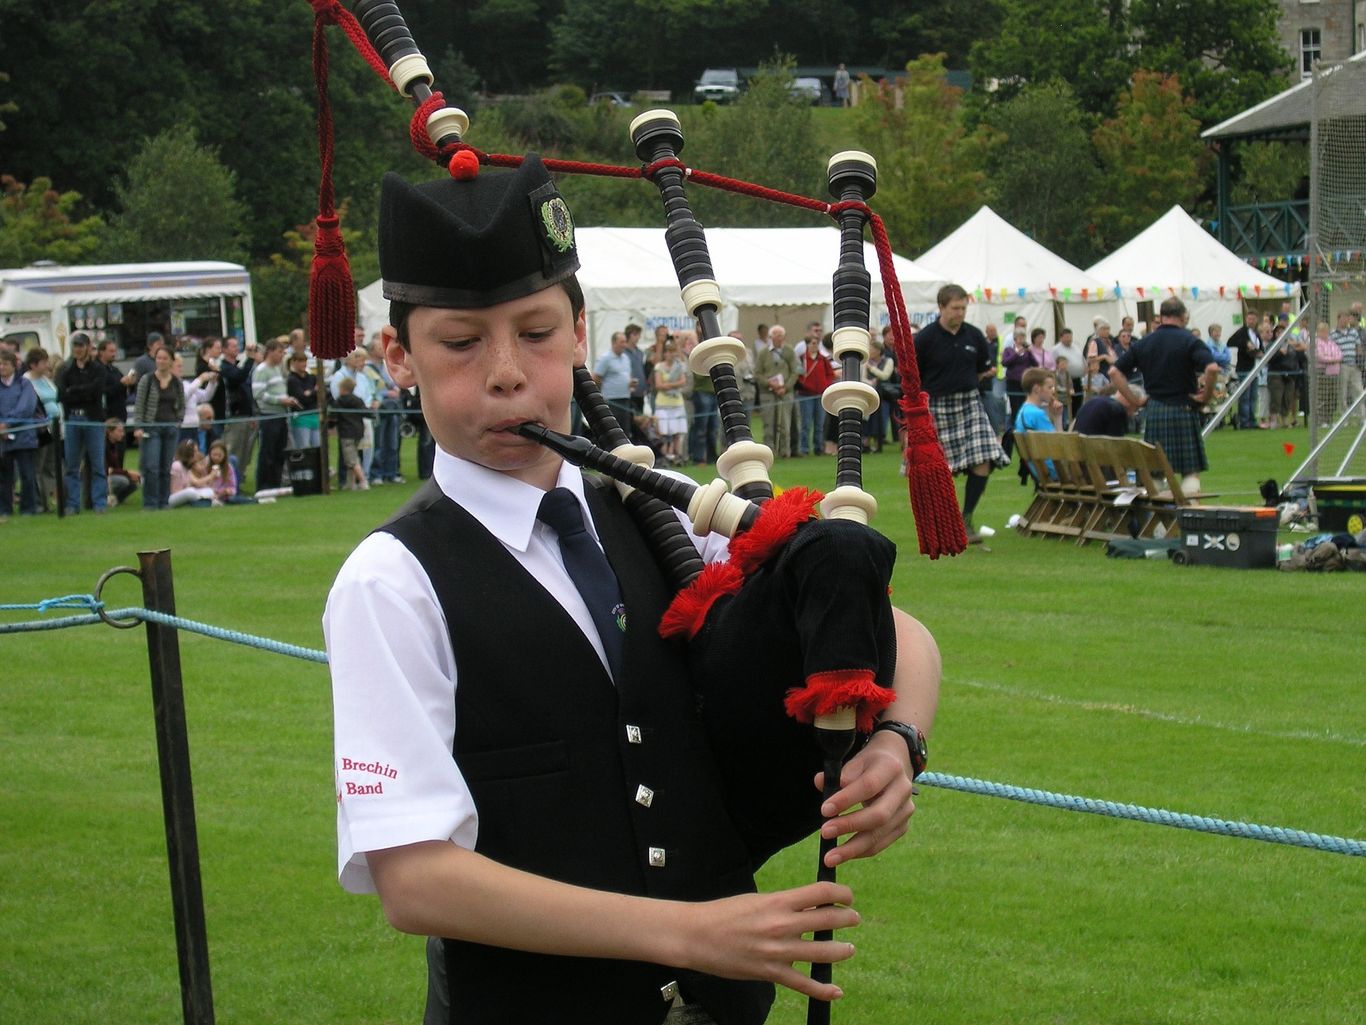 Competitions between Scottish Highland clans